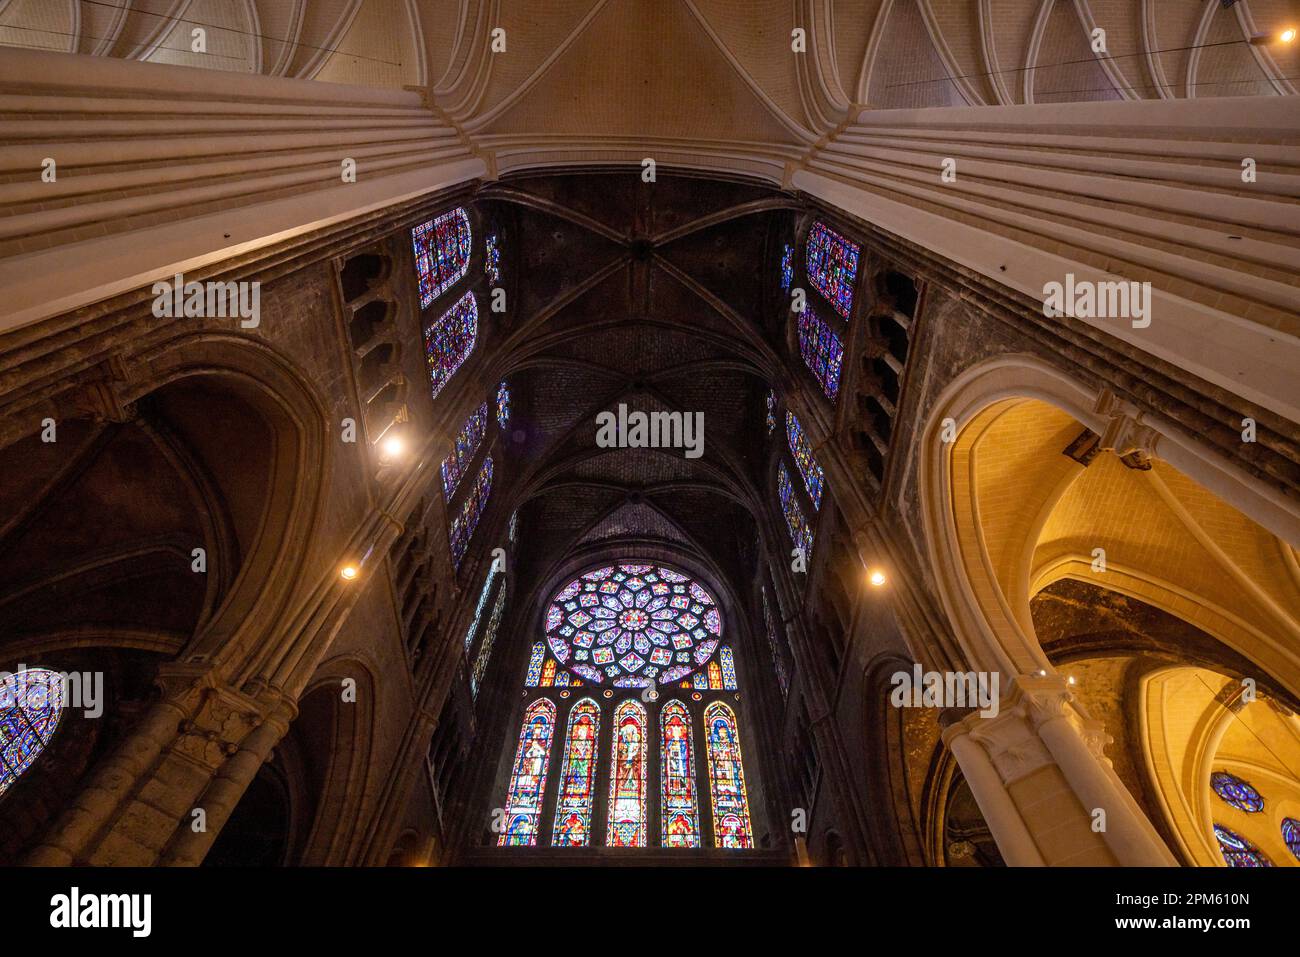 North transept and rose window, Chartres cathedral, France Stock Photo